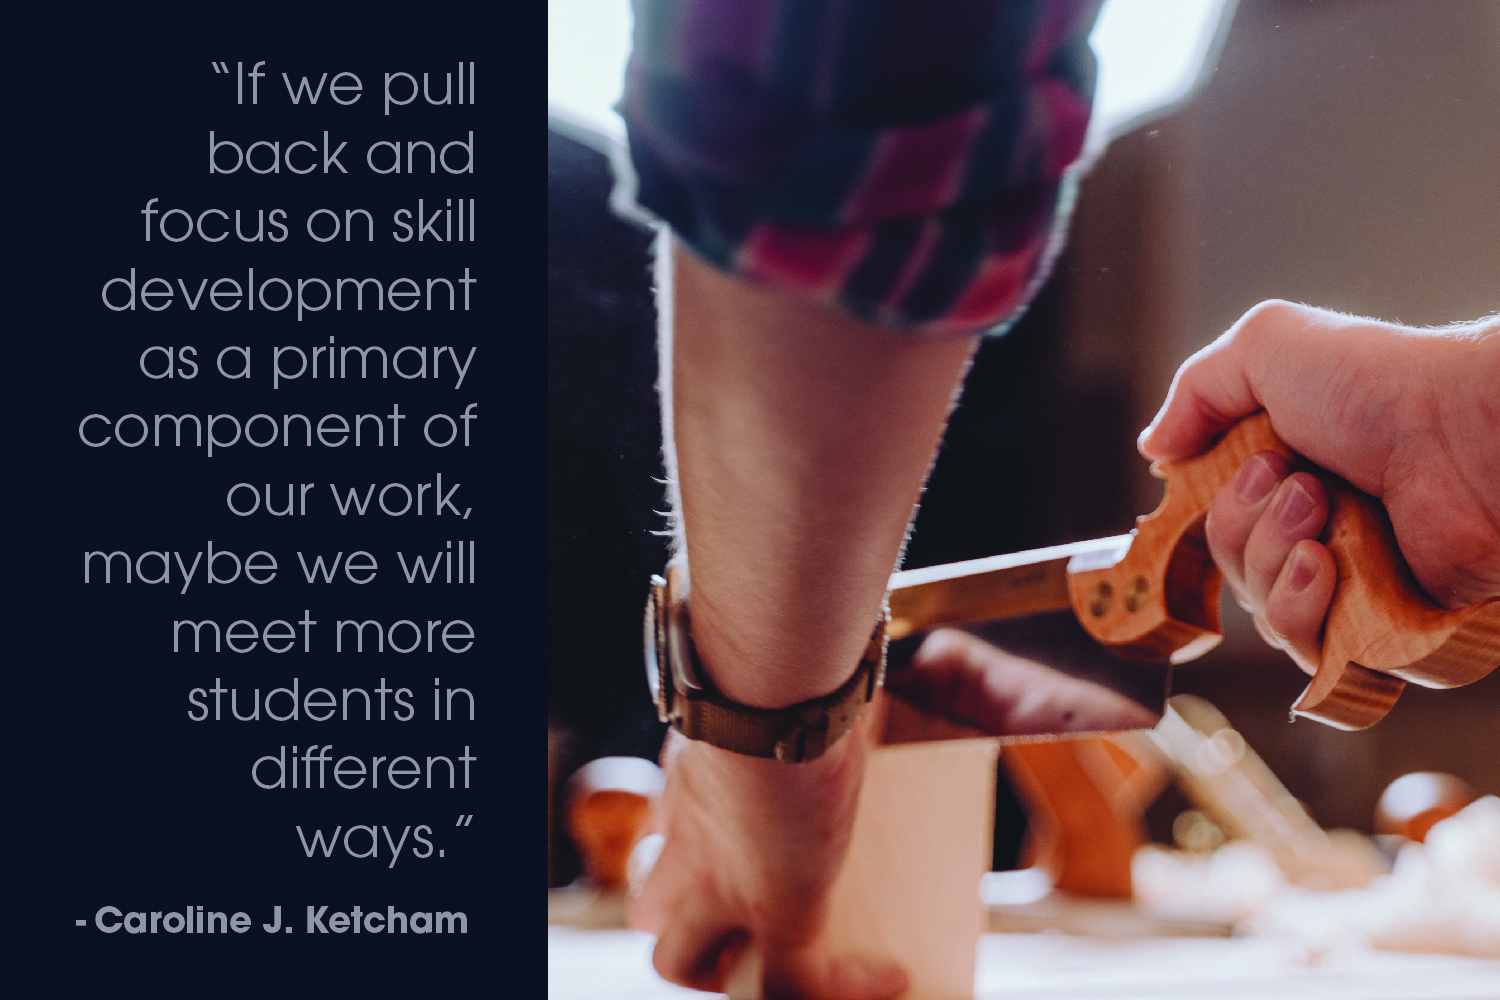 White male cutting a block of wood with his right hand. Text overlay says, "If we pull back and focus on skill development as a primary component of our work, maybe we will meet more students in different ways." --Caroline J. Ketcham